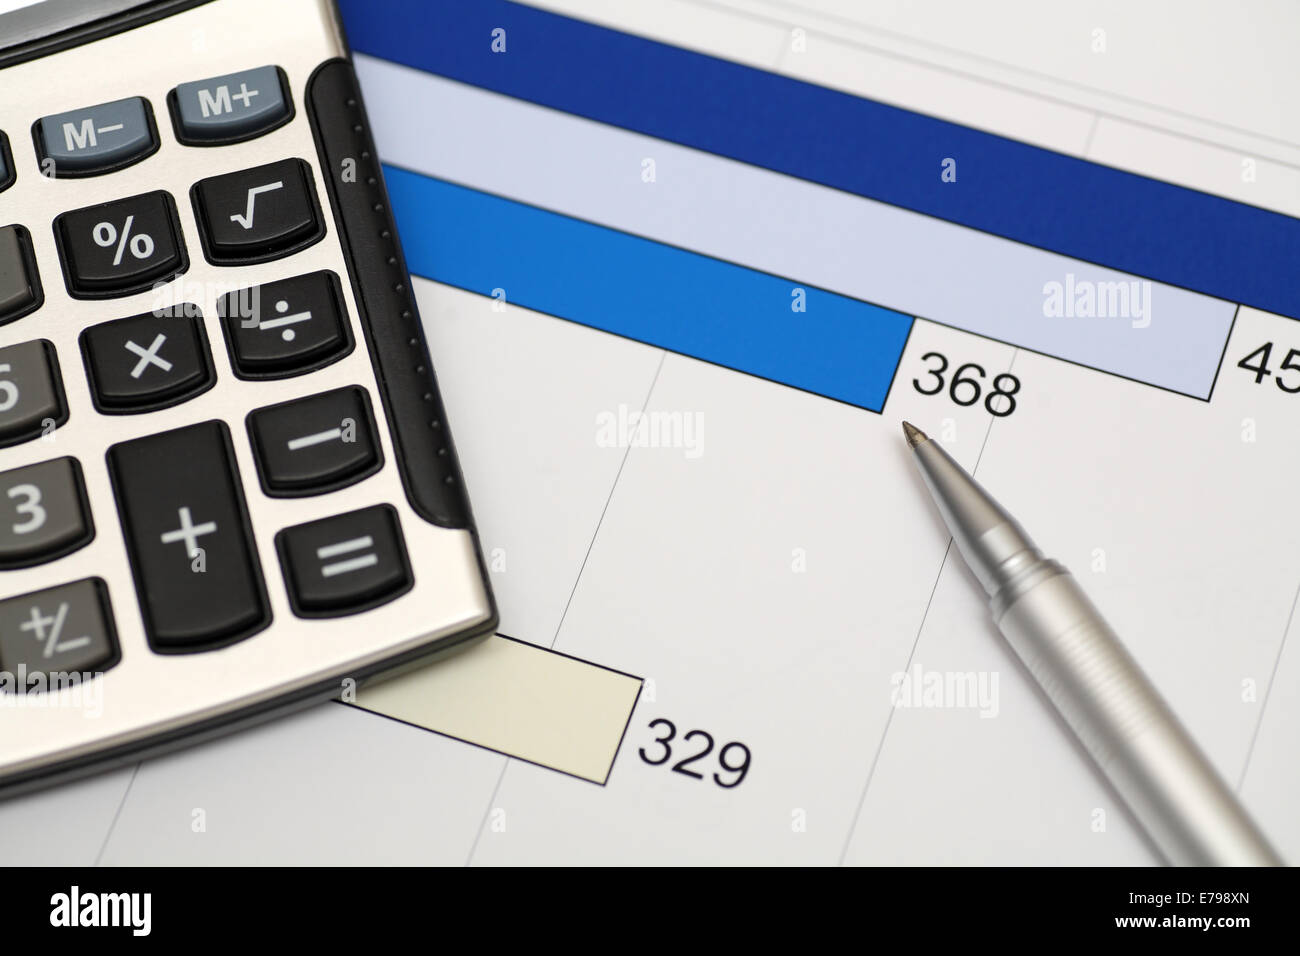 Financial data. Calculator, pen, and financial statements. Close-up. Stock Photo